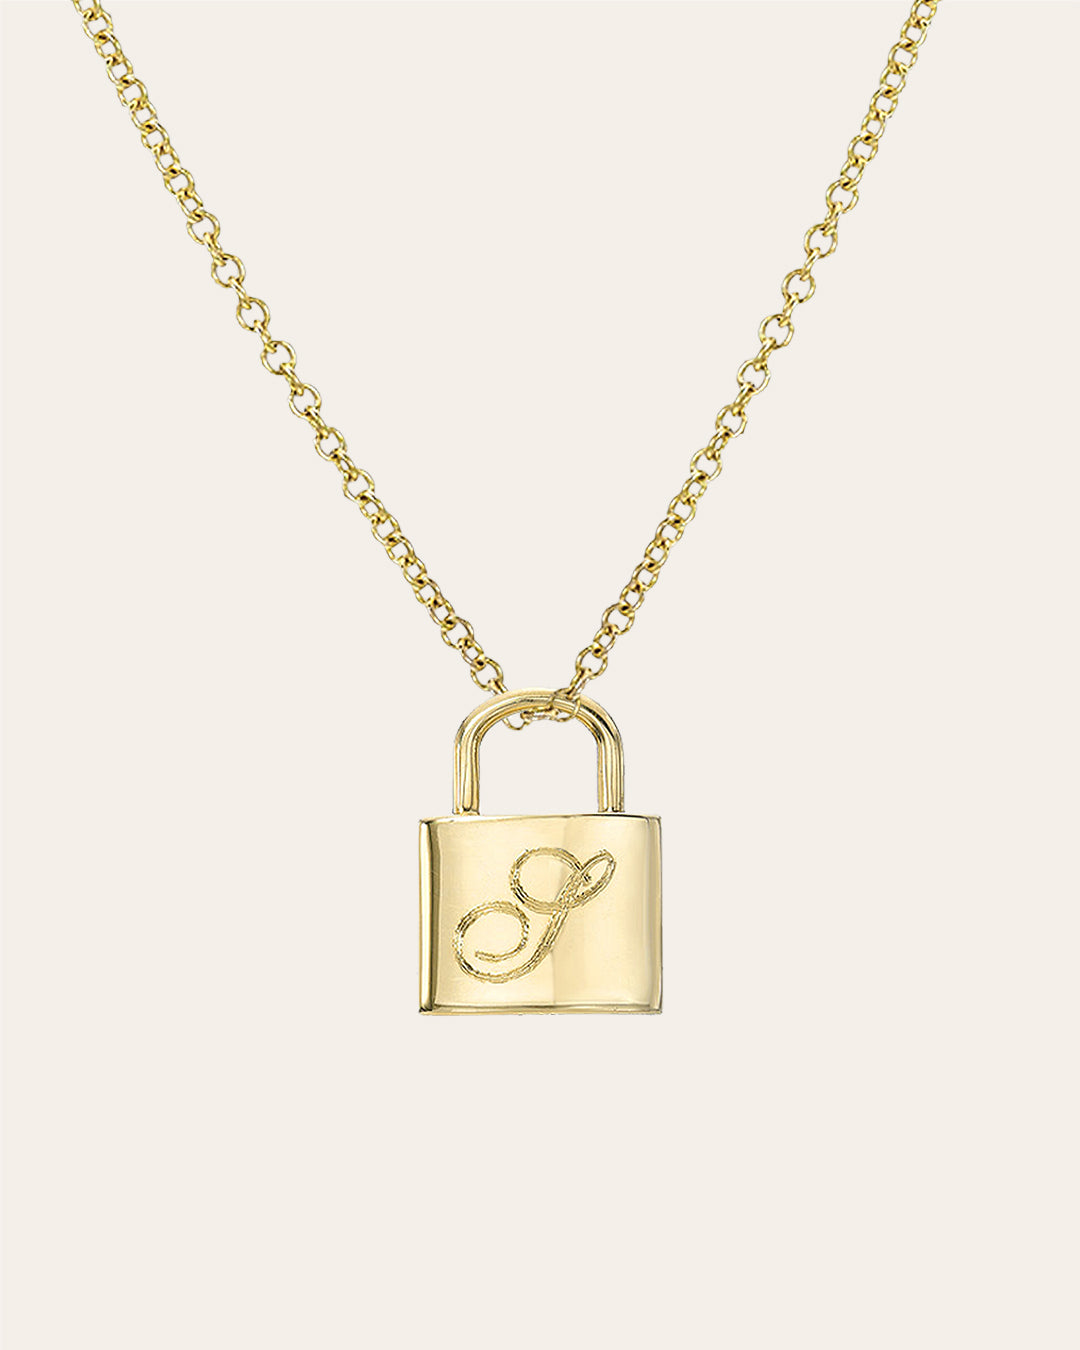 14K Gold Lock Necklace